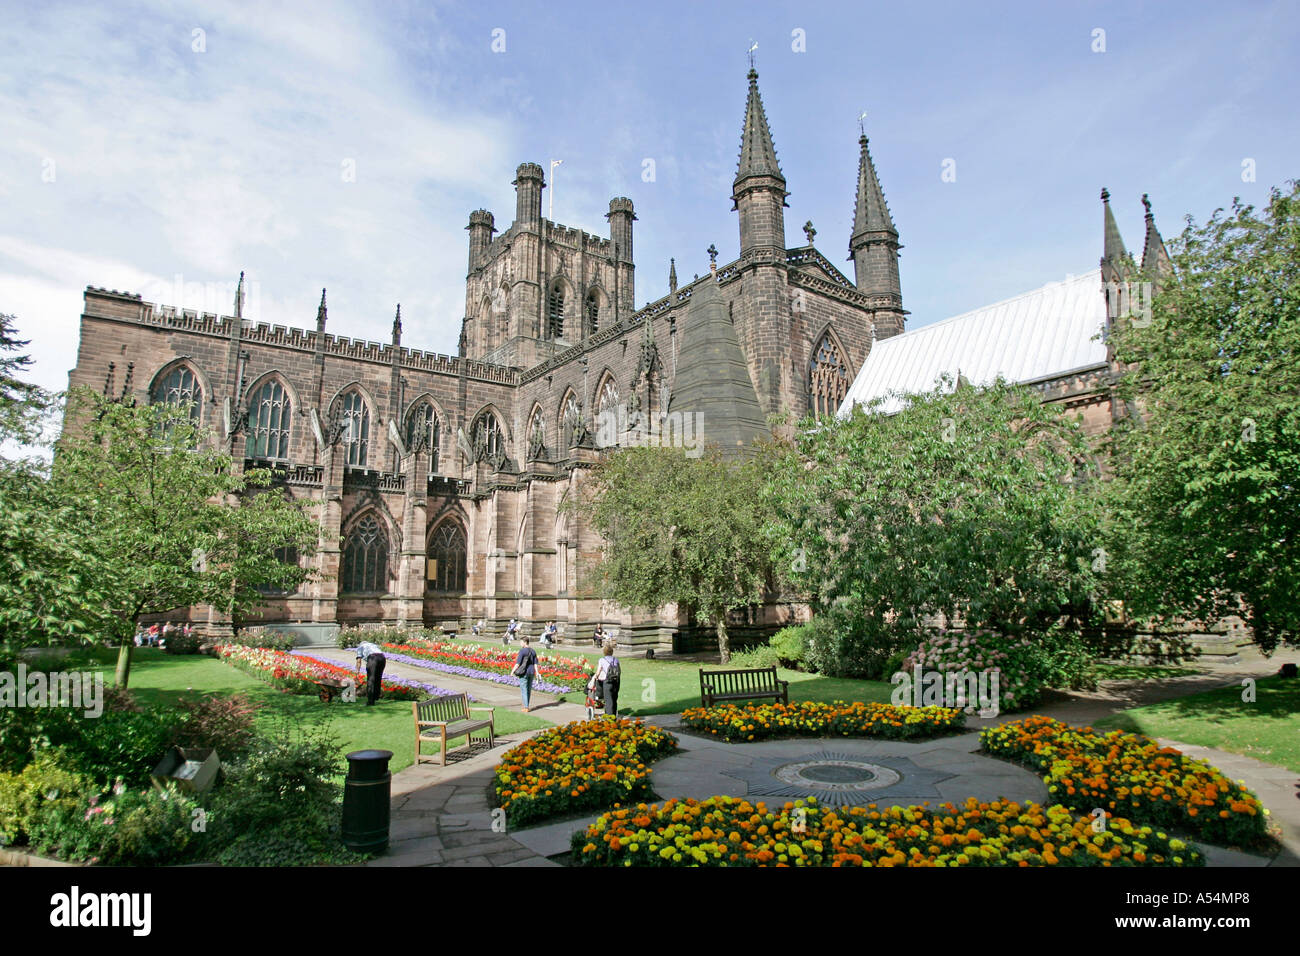 Chester, GBR, 23. Aug. 2005 - View to the Chester cathedral. Stock Photo